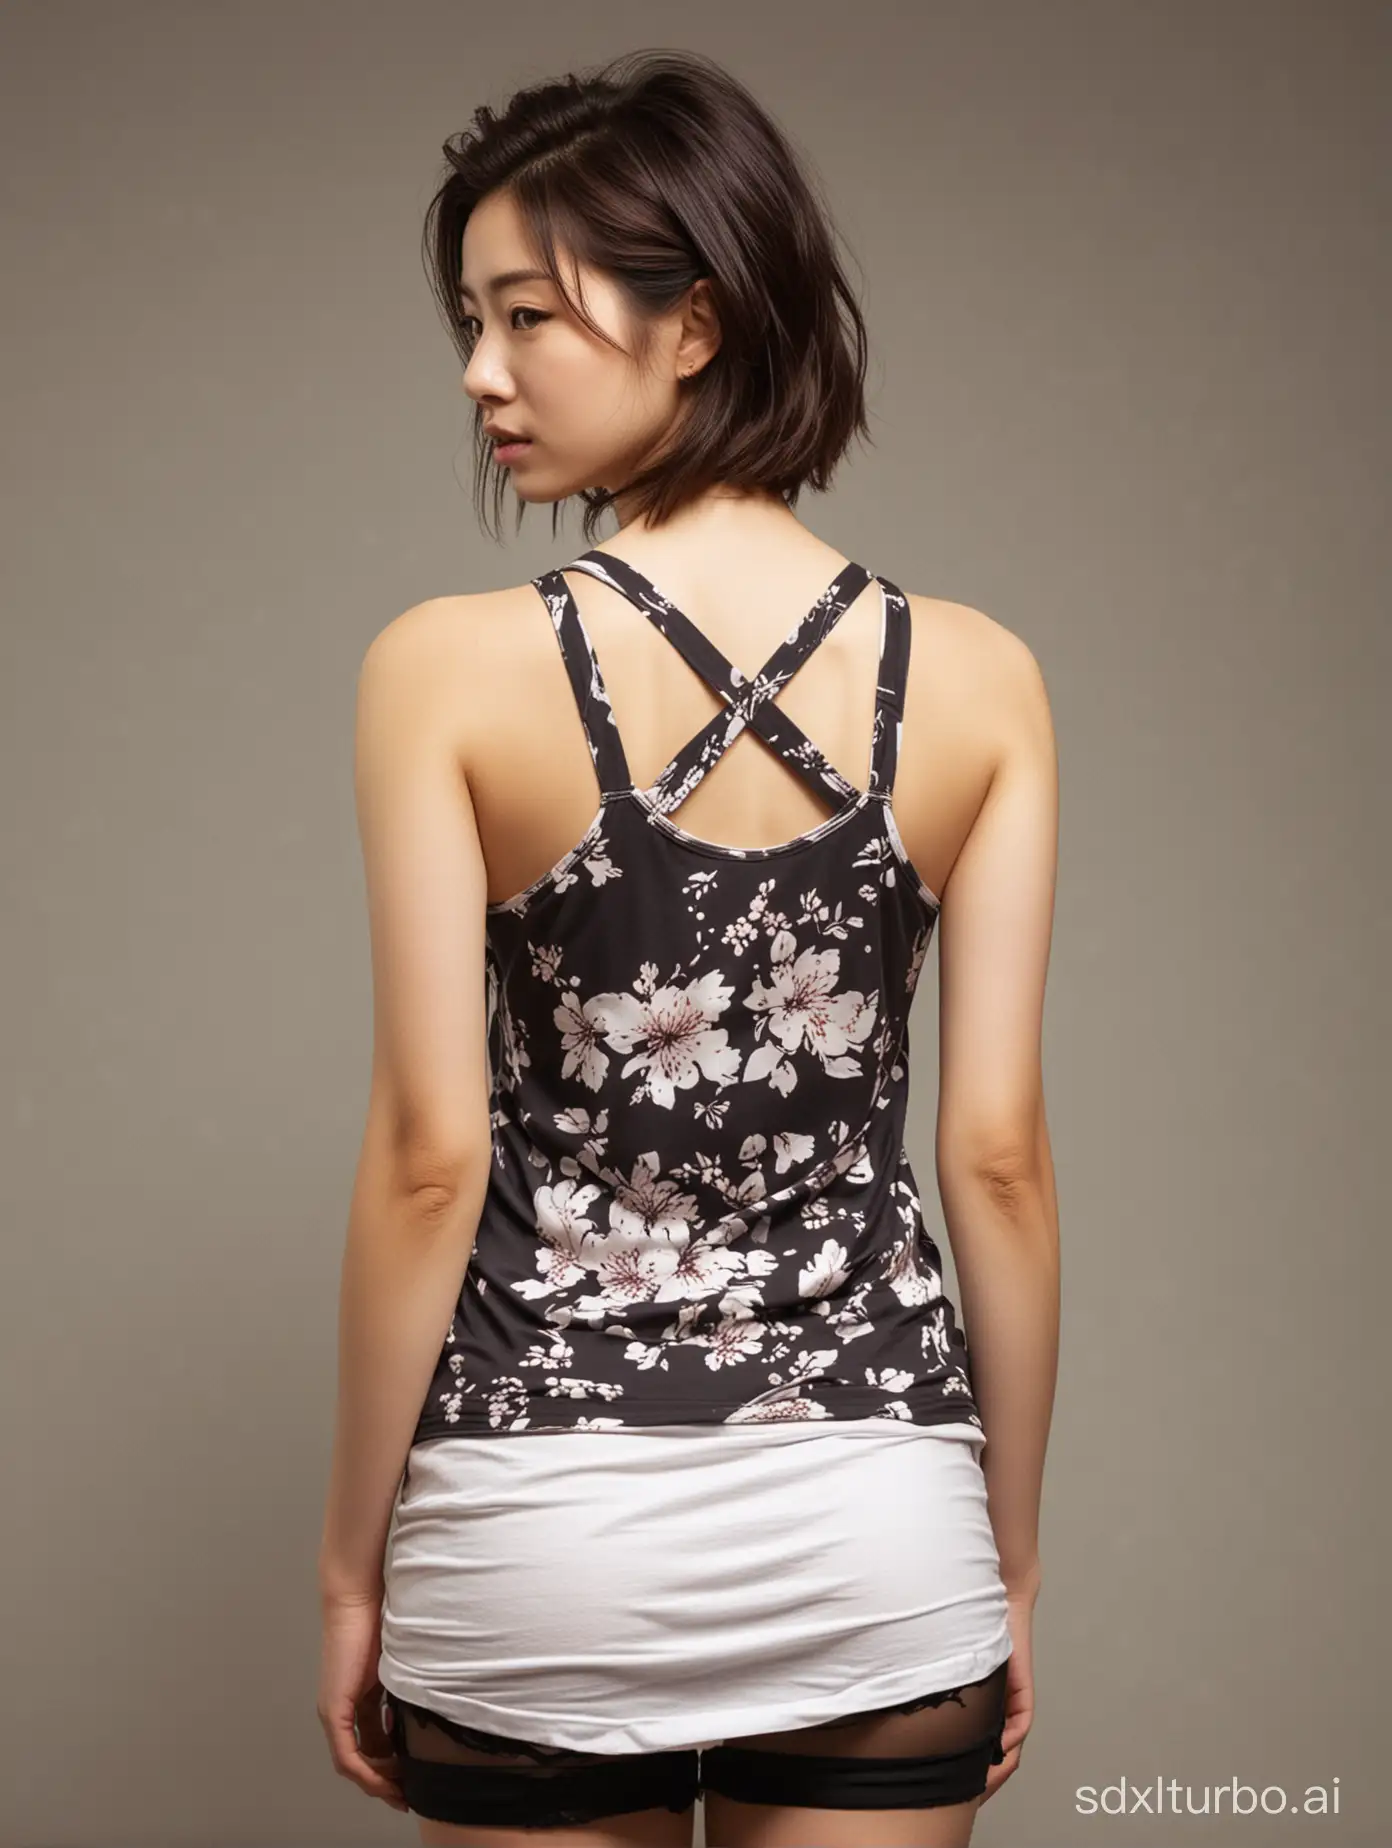 Fukada Kyoko,,full body，tank top,back view,photograph style of “Faces of A.Picolo" series